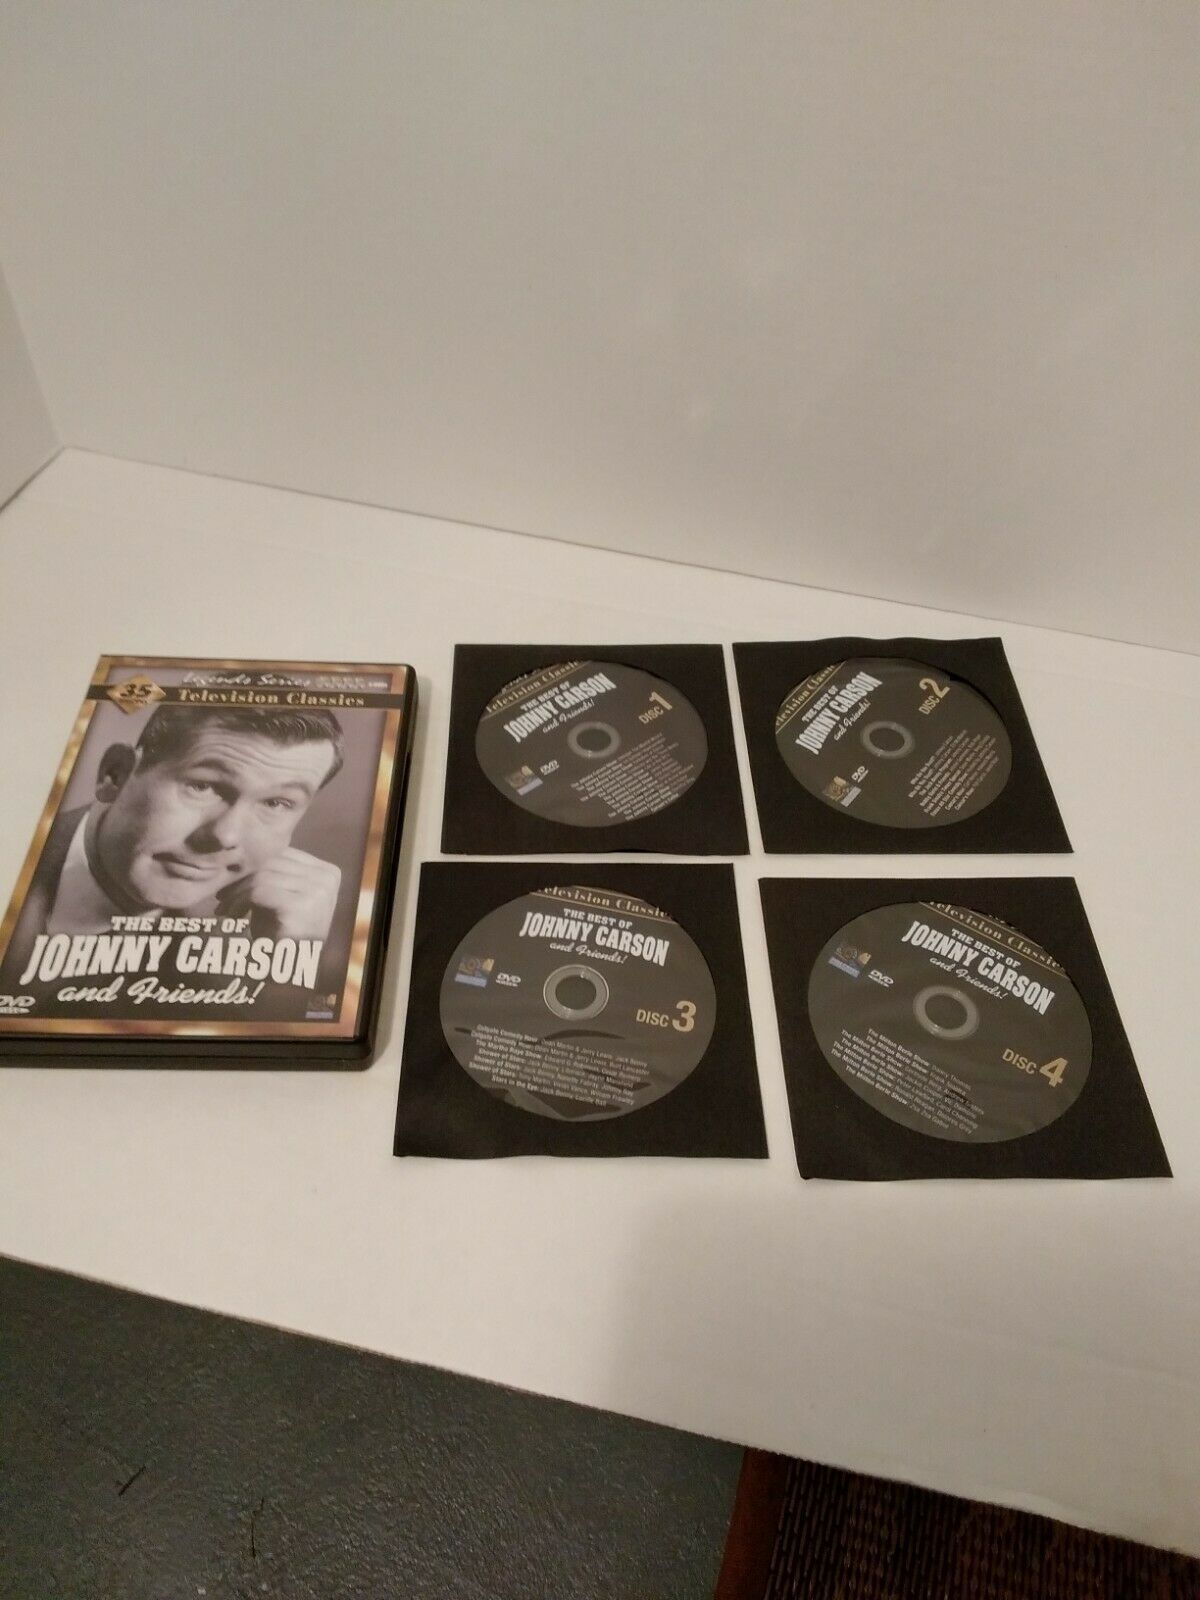 Primary image for The Best Of Johnny Carson And Friends DVD Set (4)